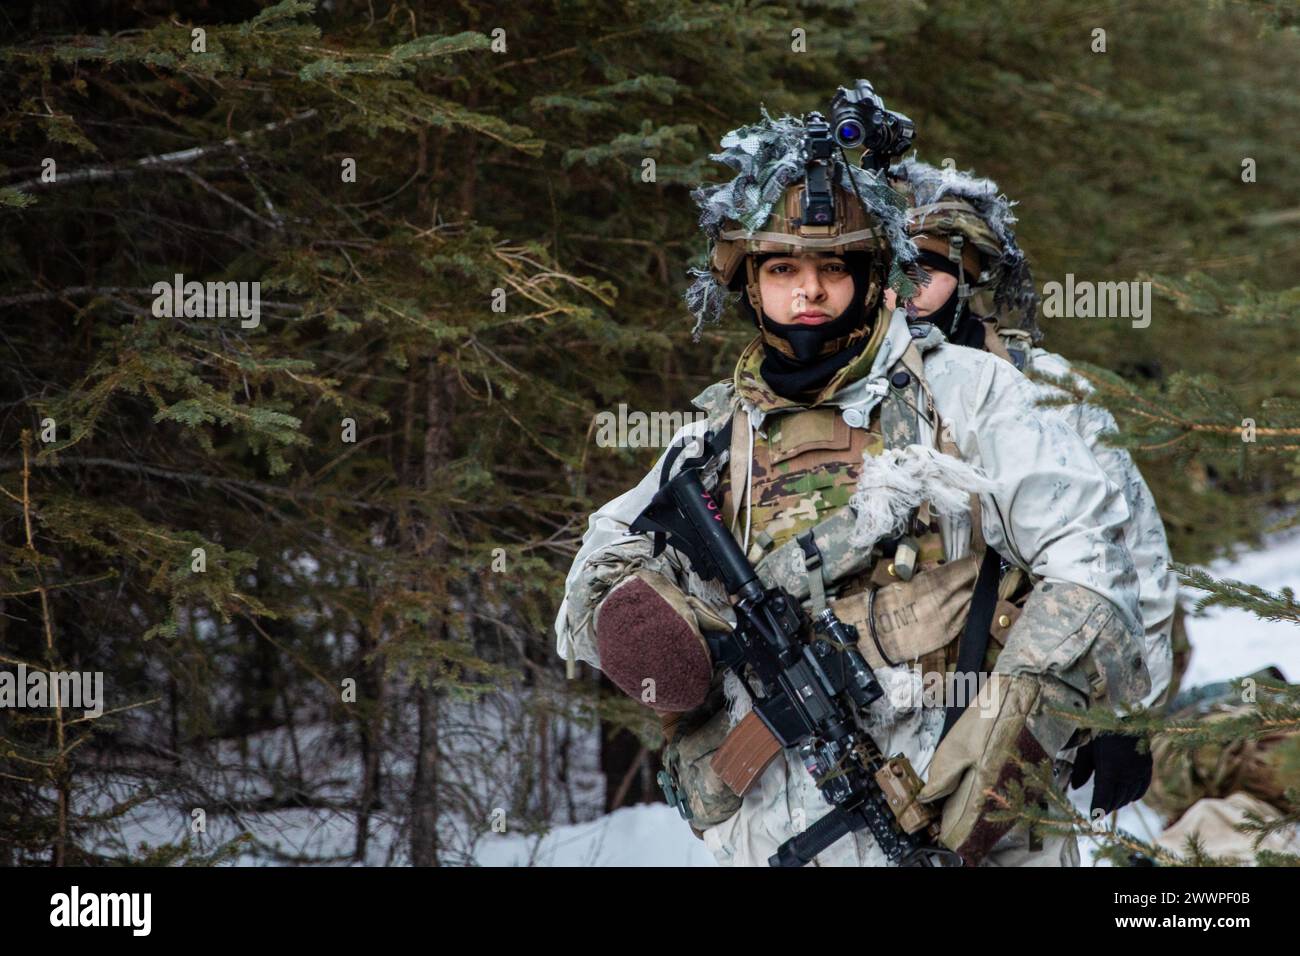 A U.S. Soldier, assigned to 1st Battalion, 5th Infantry Regiment, 1st Infantry Brigade Combat Team, 11th Airborne Division, pushes forward through a forest during Joint Pacific Multinational Readiness Center 24-02 at Donnelly Training Area, Alaska, Feb. 17, 2024. A company of soldiers moved uphill through the woods toward an exercise objective with possible simulated enemy forces in the area. JPMRC 24-02, executed in Alaska with its world-class training facilities and its harsh Arctic environment, builds Soldiers and leaders into a cohesive team of skilled, tough, alert, and adaptive warriors Stock Photo